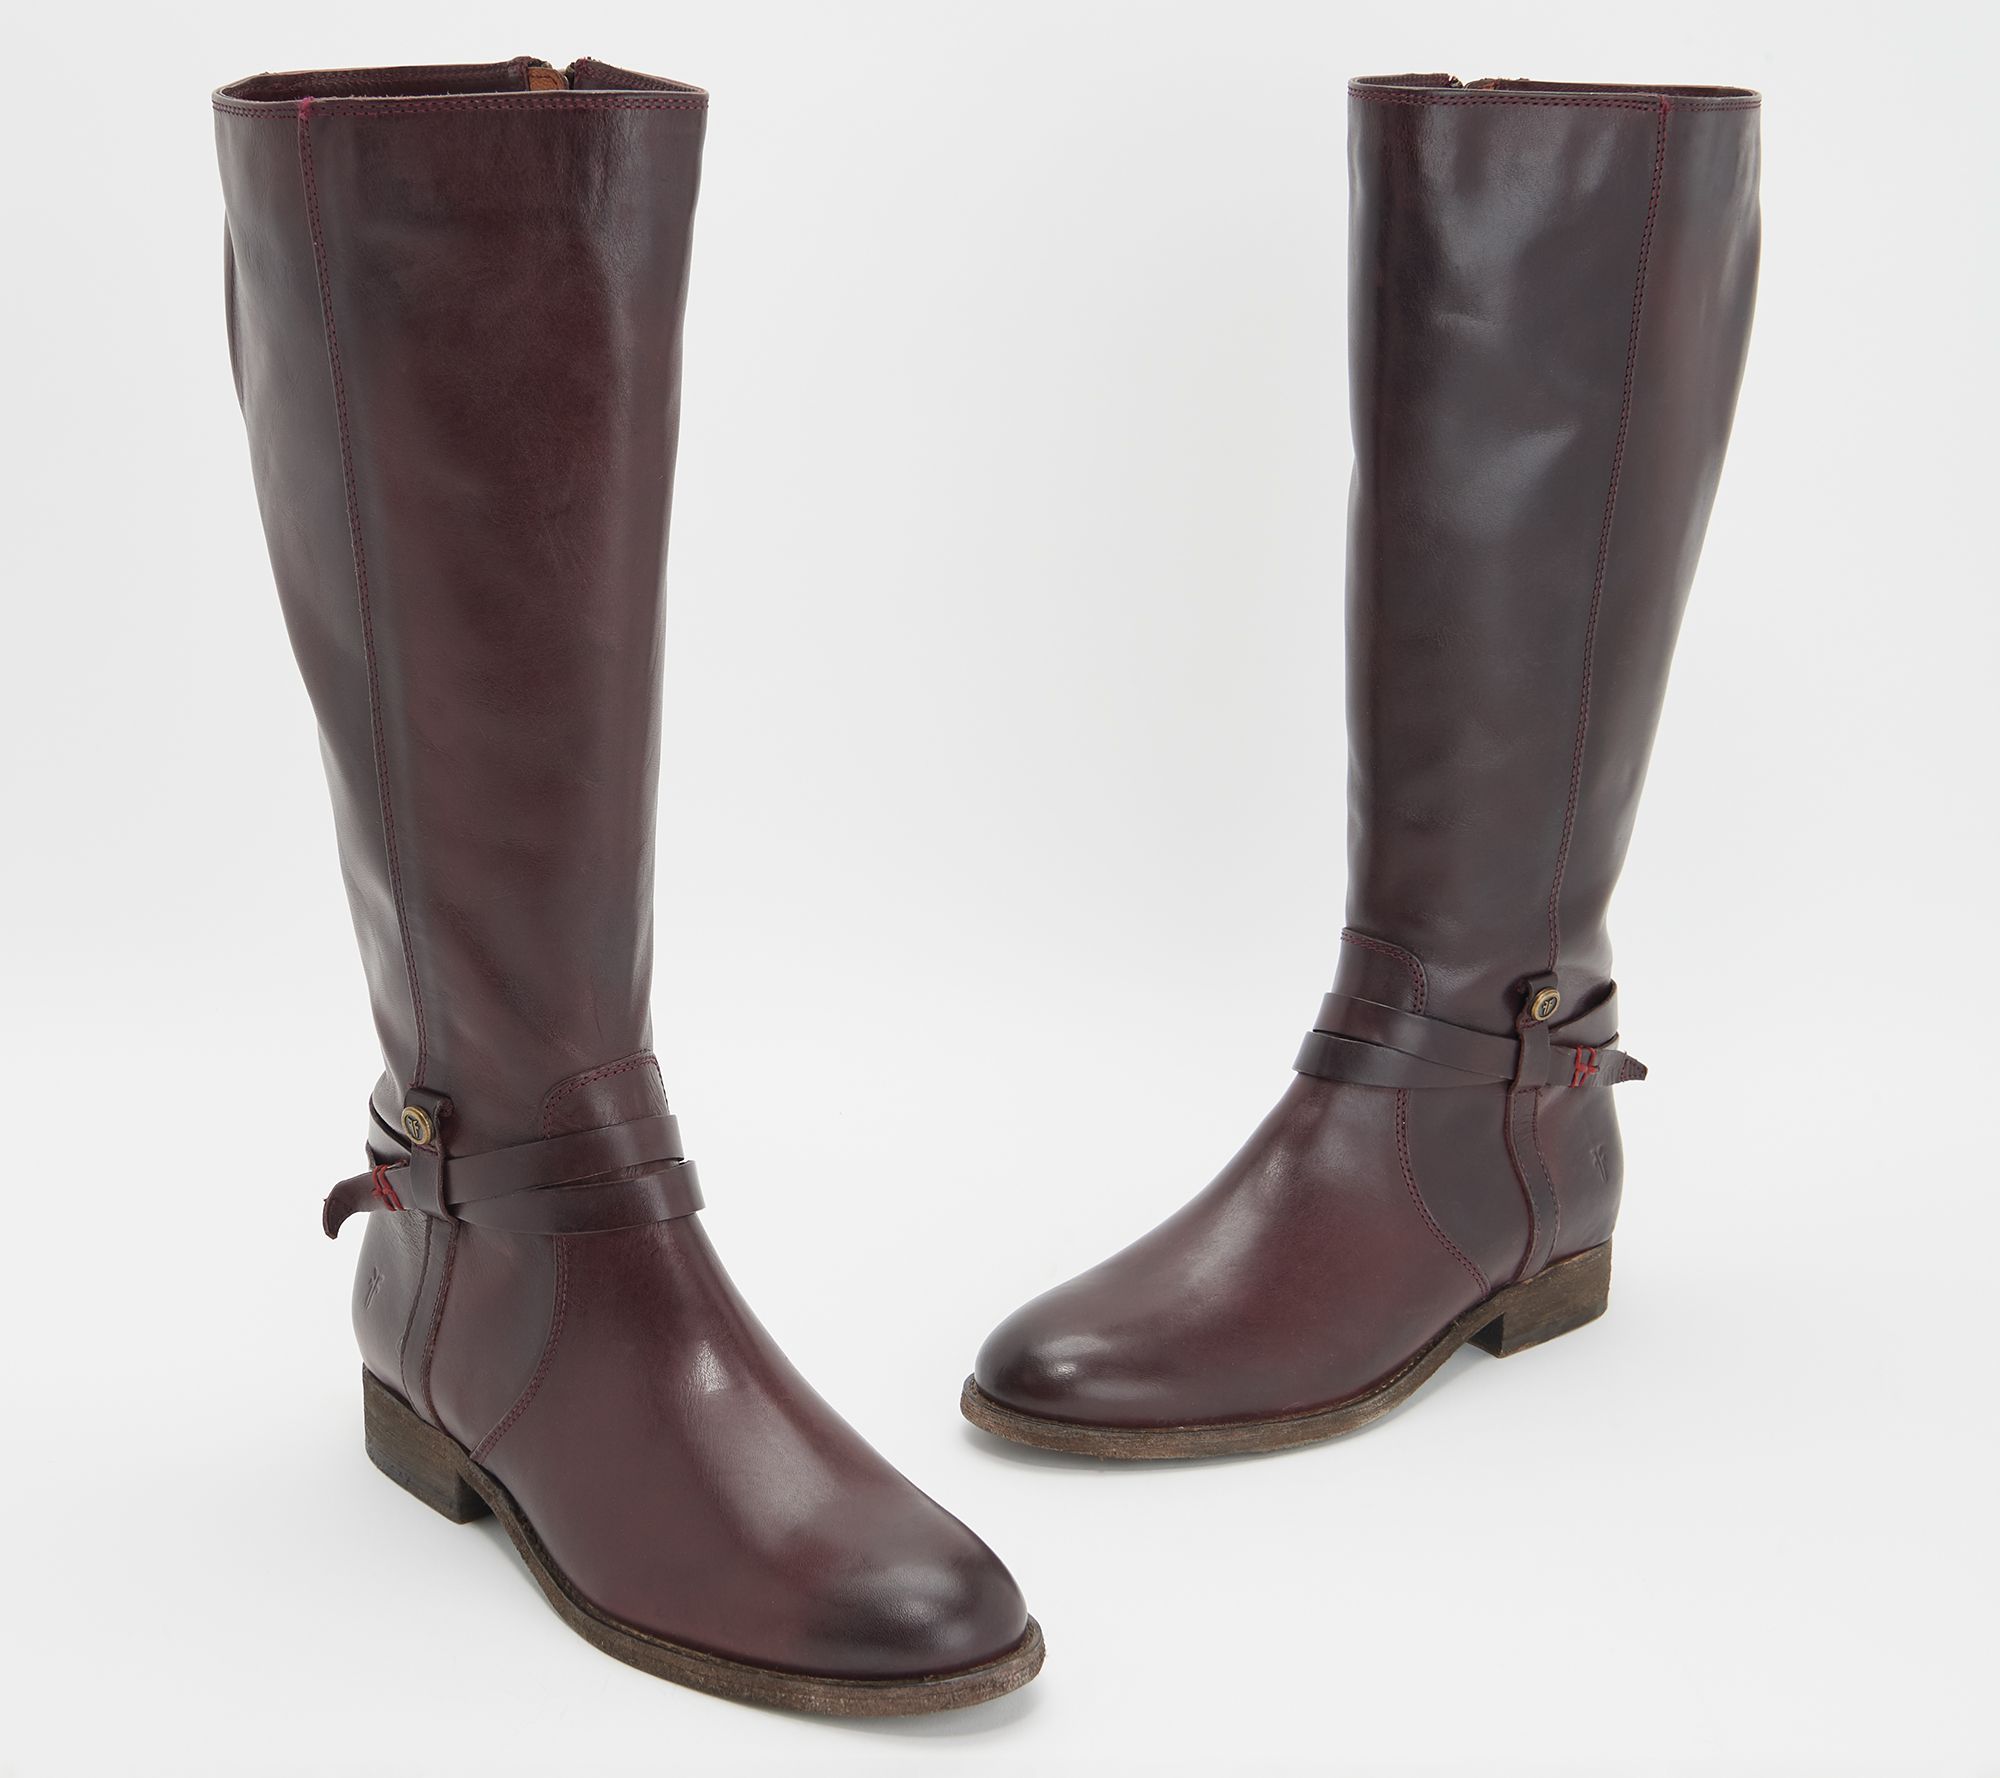 wide calf tall leather boots